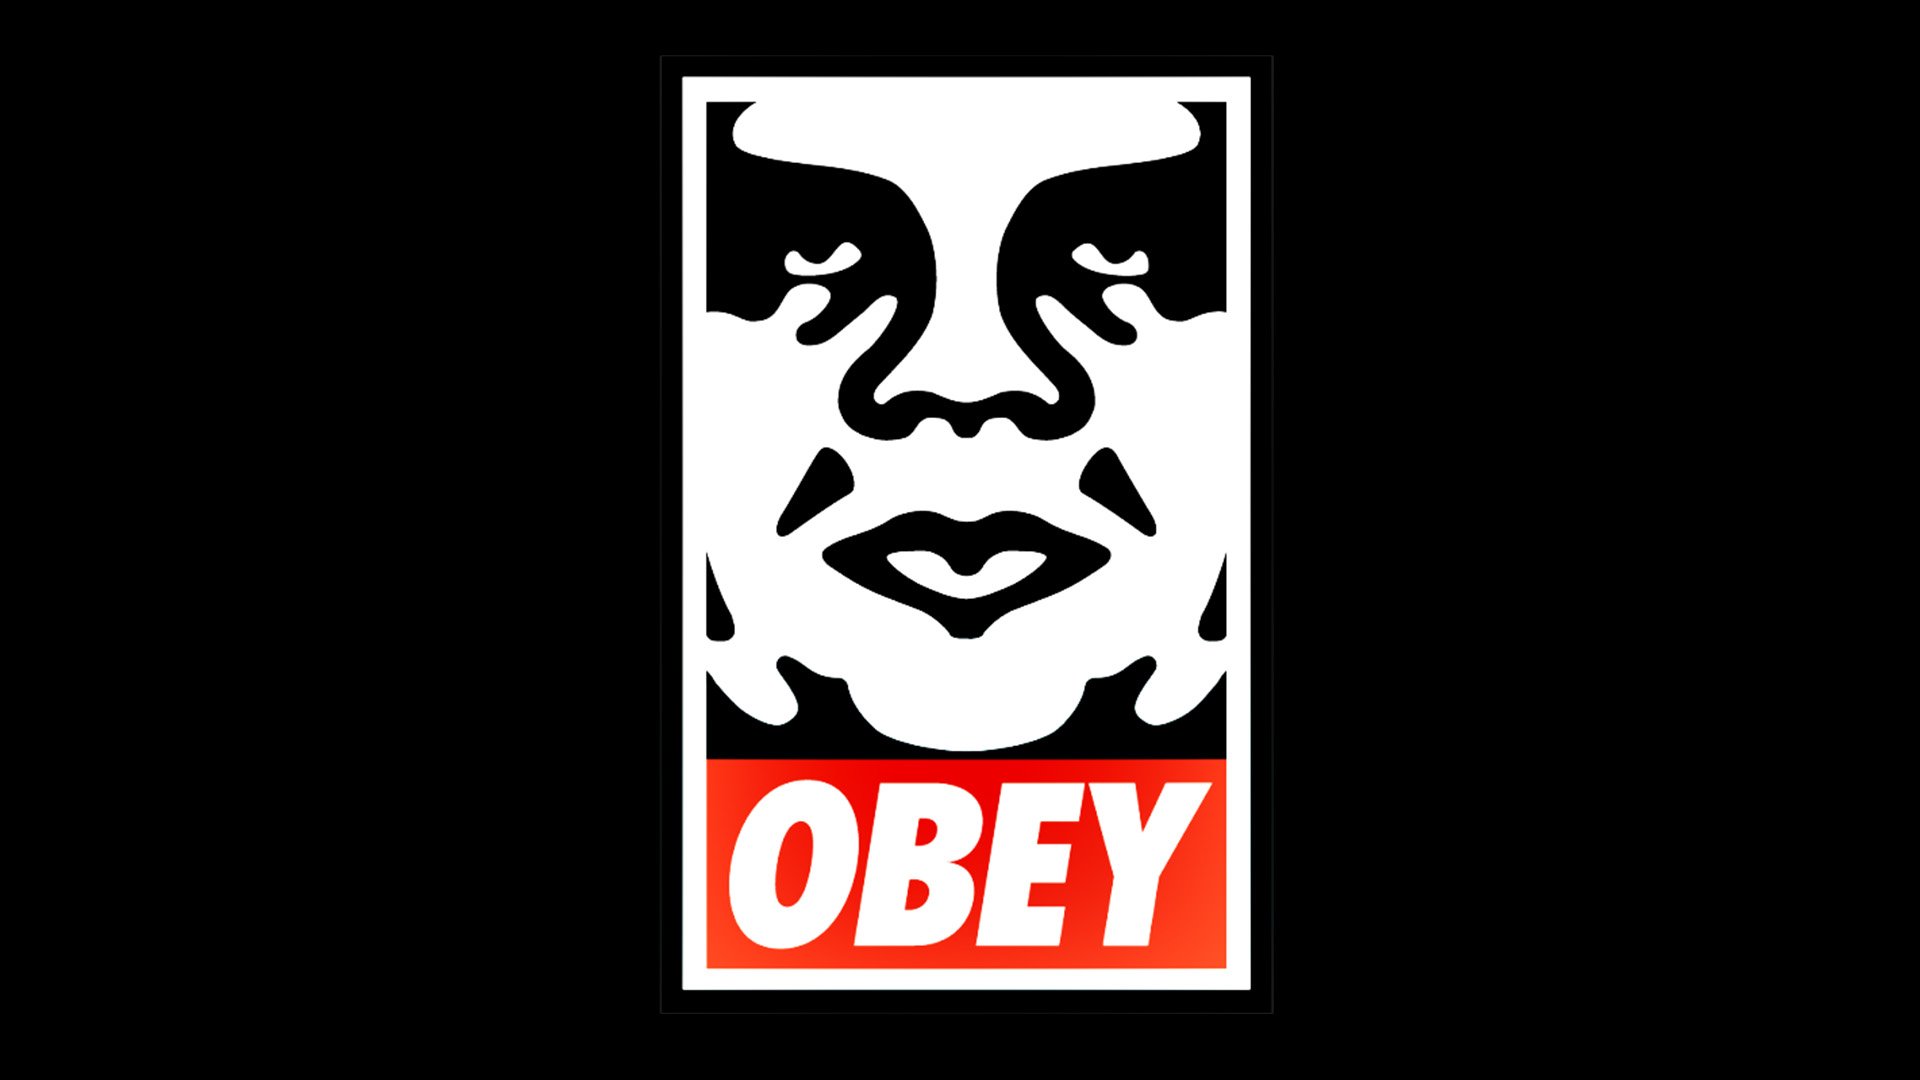 obey logo black and white